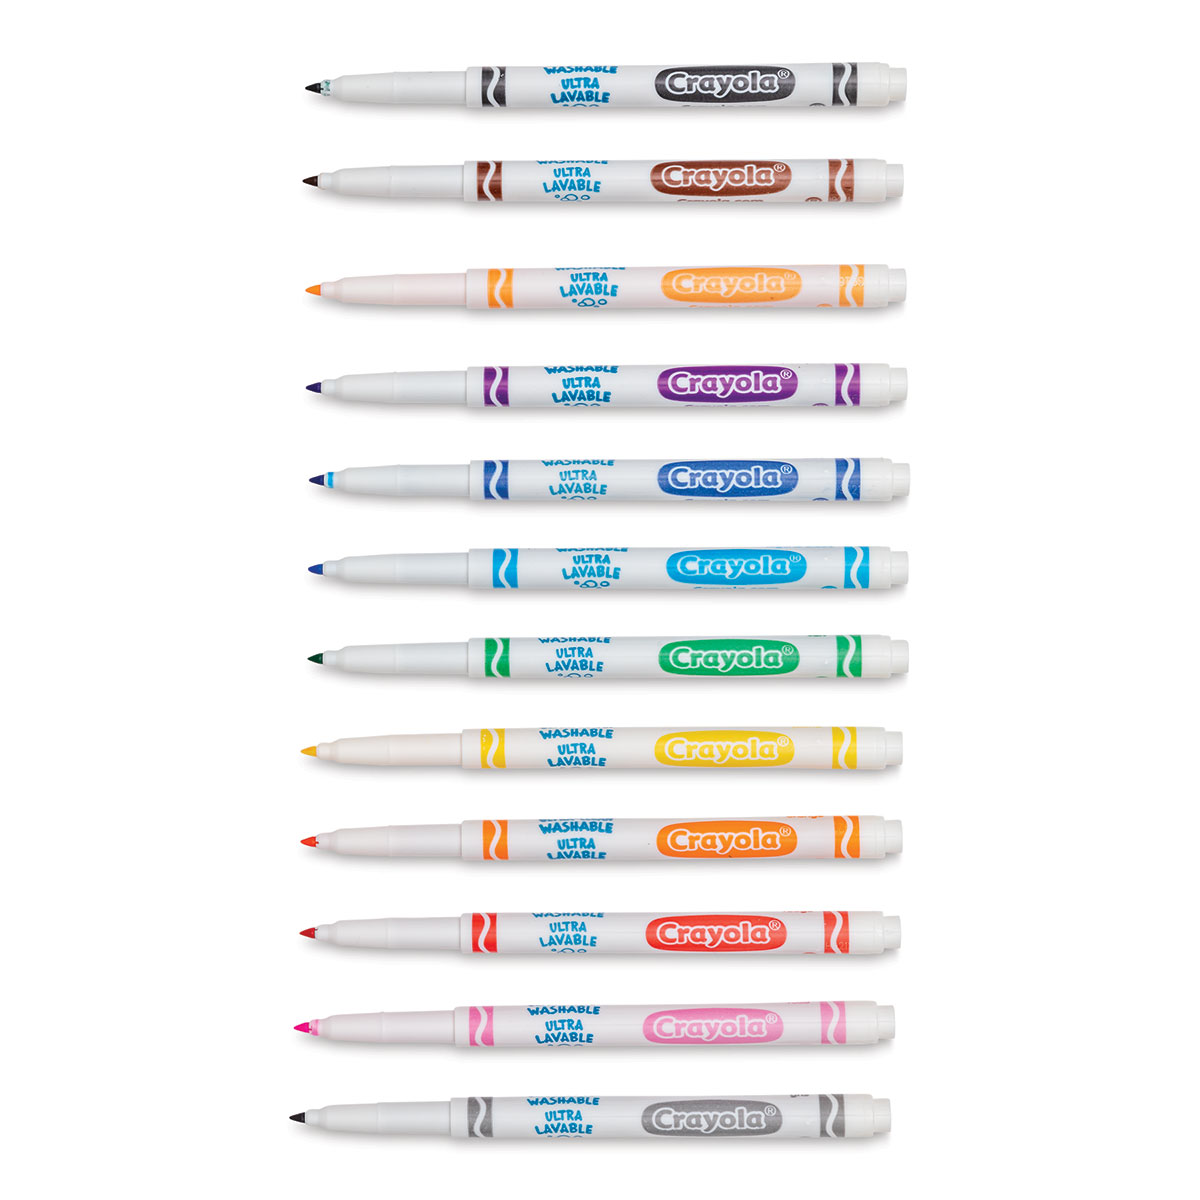 Crayola Ultra-Clean Washable Markers Classroom Pack - Assorted